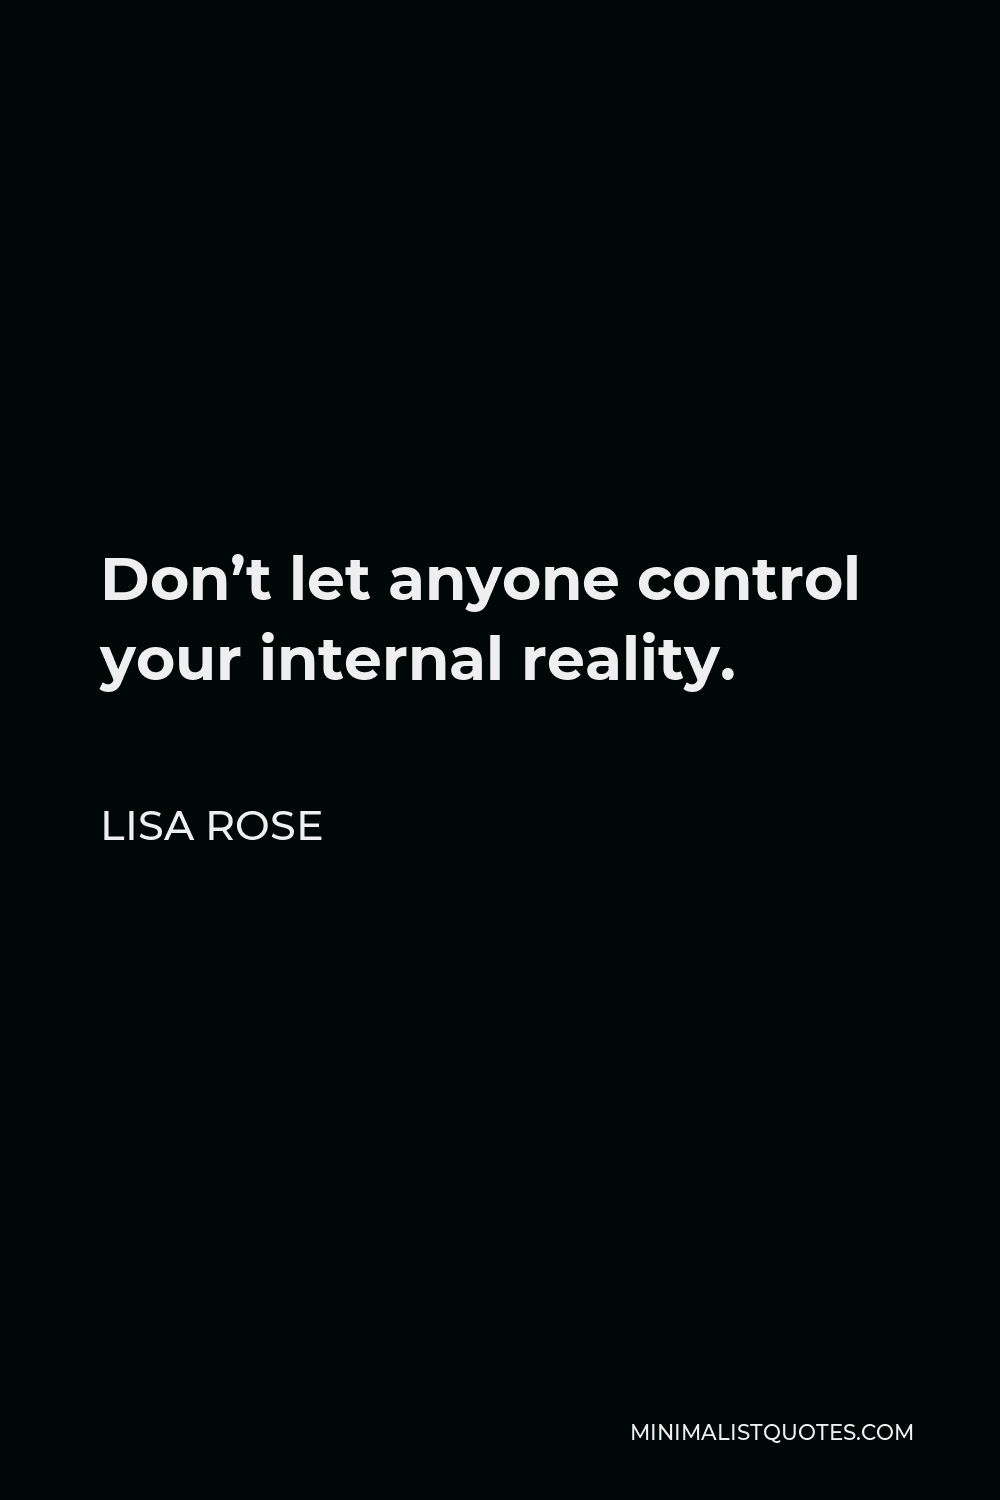 Lisa Rose Quote - Don’t let anyone control your internal reality.